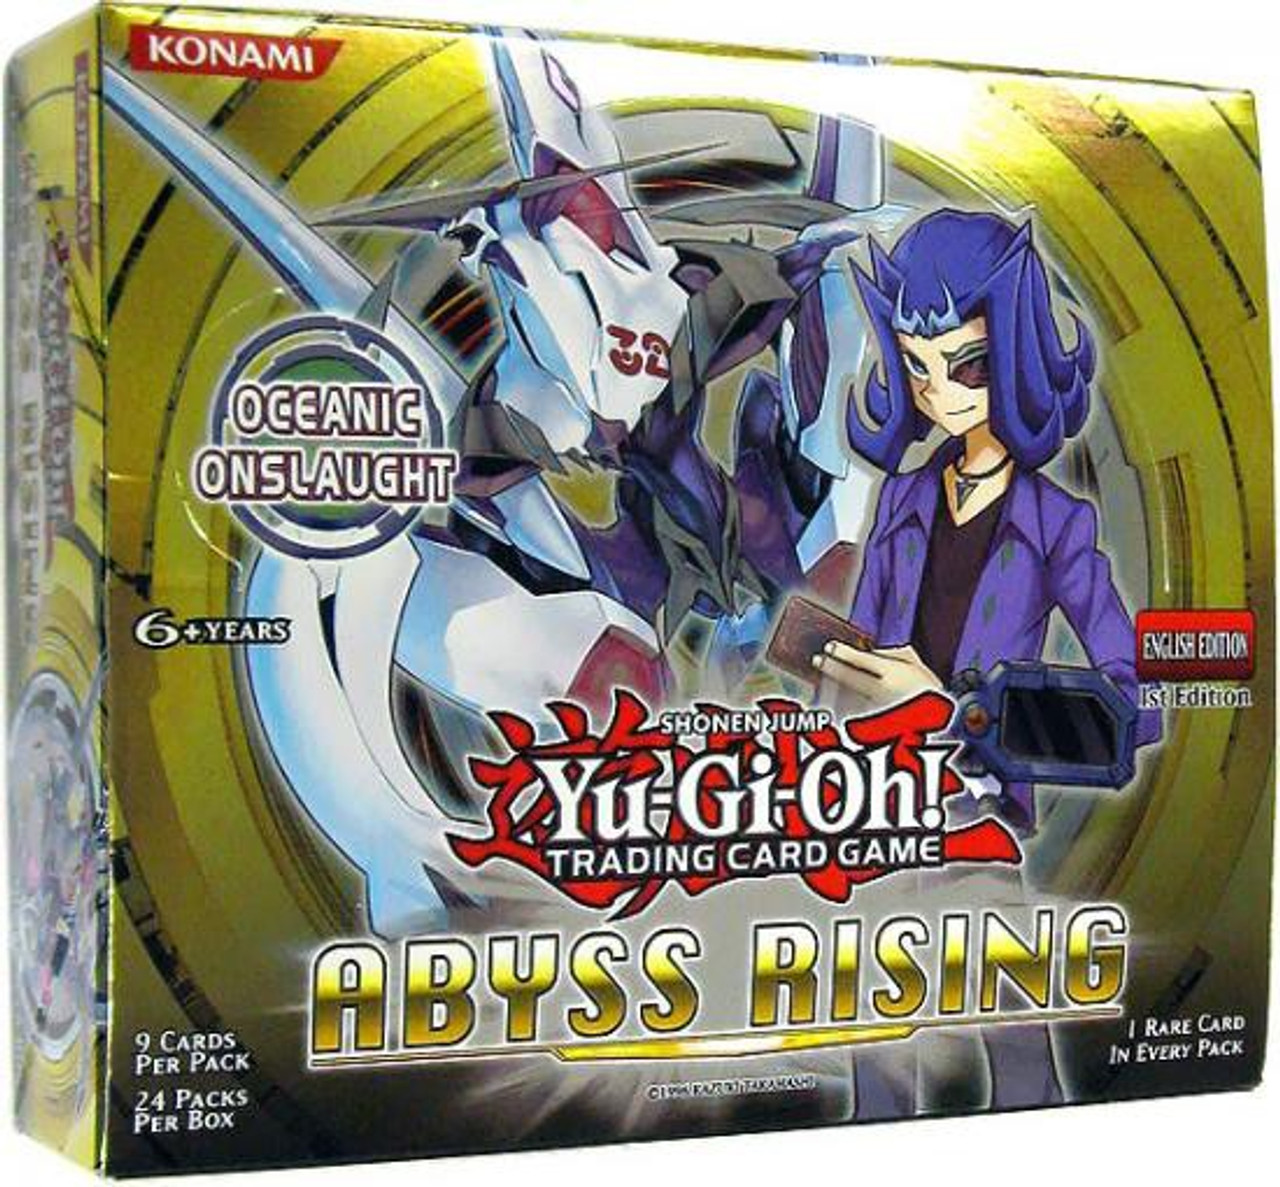 Yugioh Trading Card Game Abyss Rising Booster Box 24 Packs Konami Toywiz - the ink abyss roblox